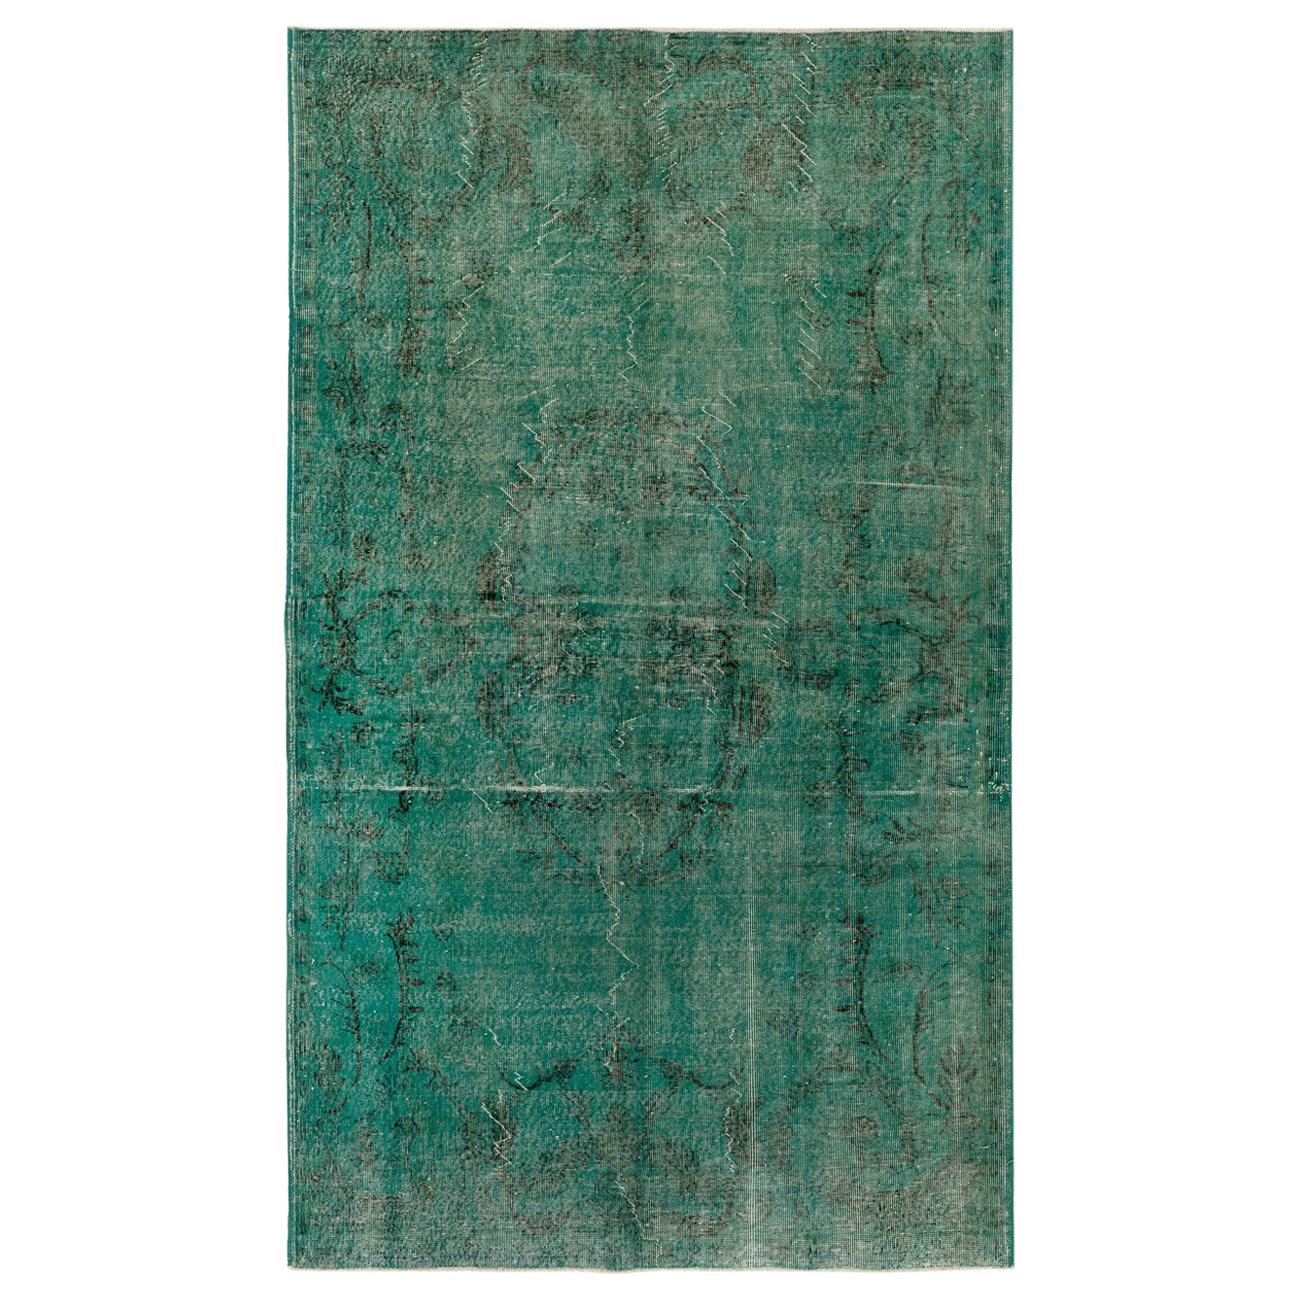 6x9 Teal Color OverDyed Distressed Vintage Rug. Wool Carpet for Modern Interiors